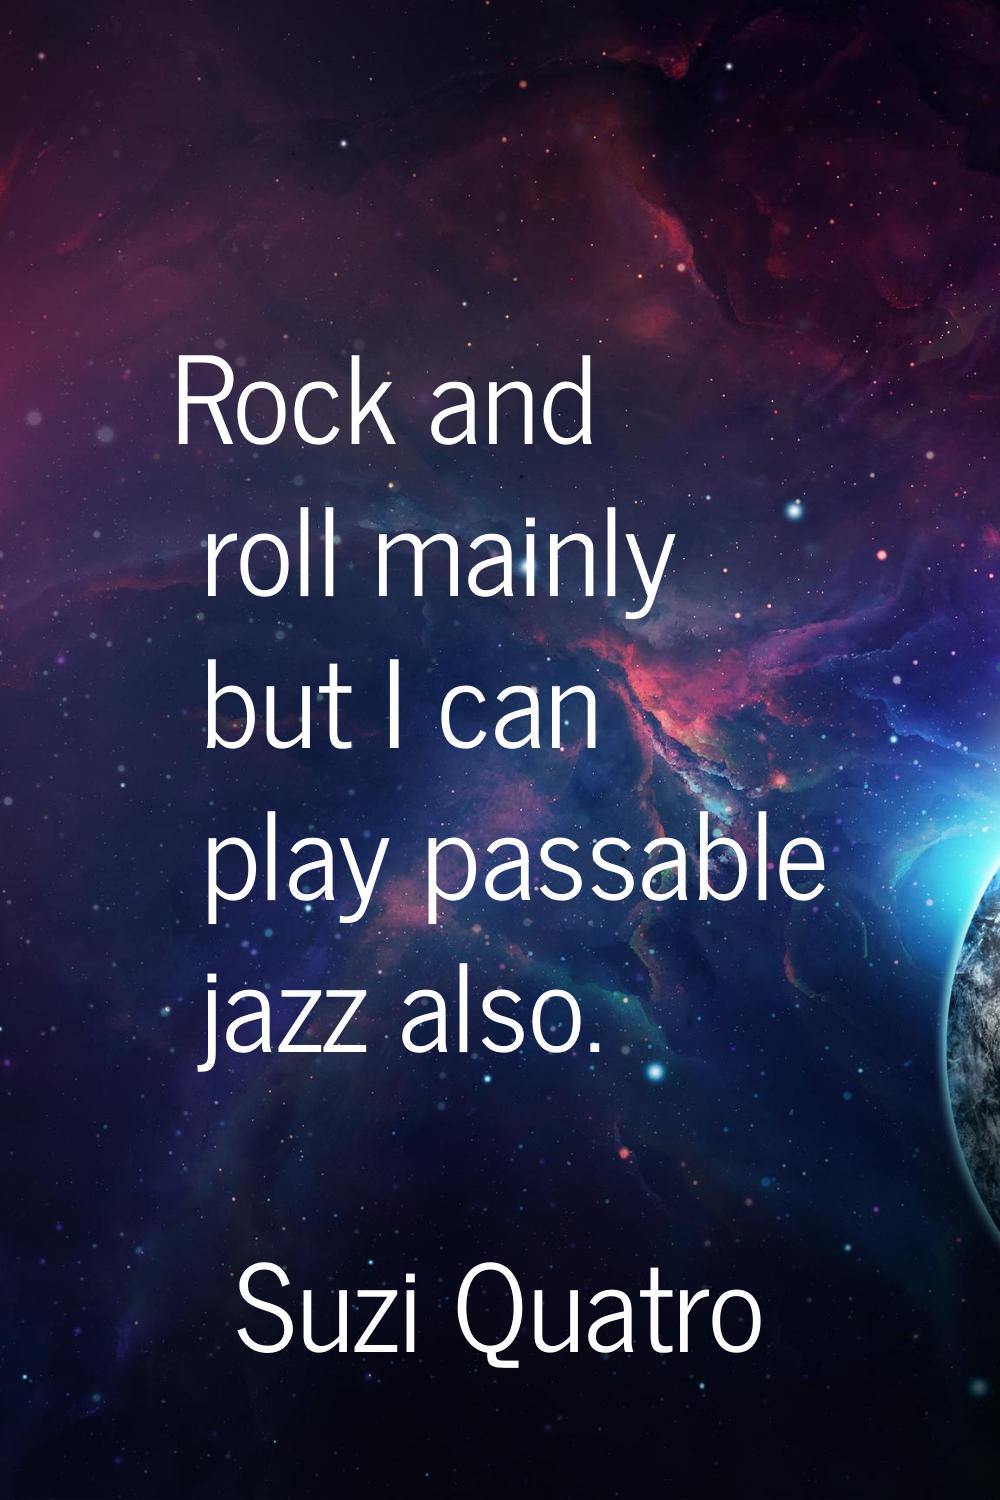 Rock and roll mainly but I can play passable jazz also.